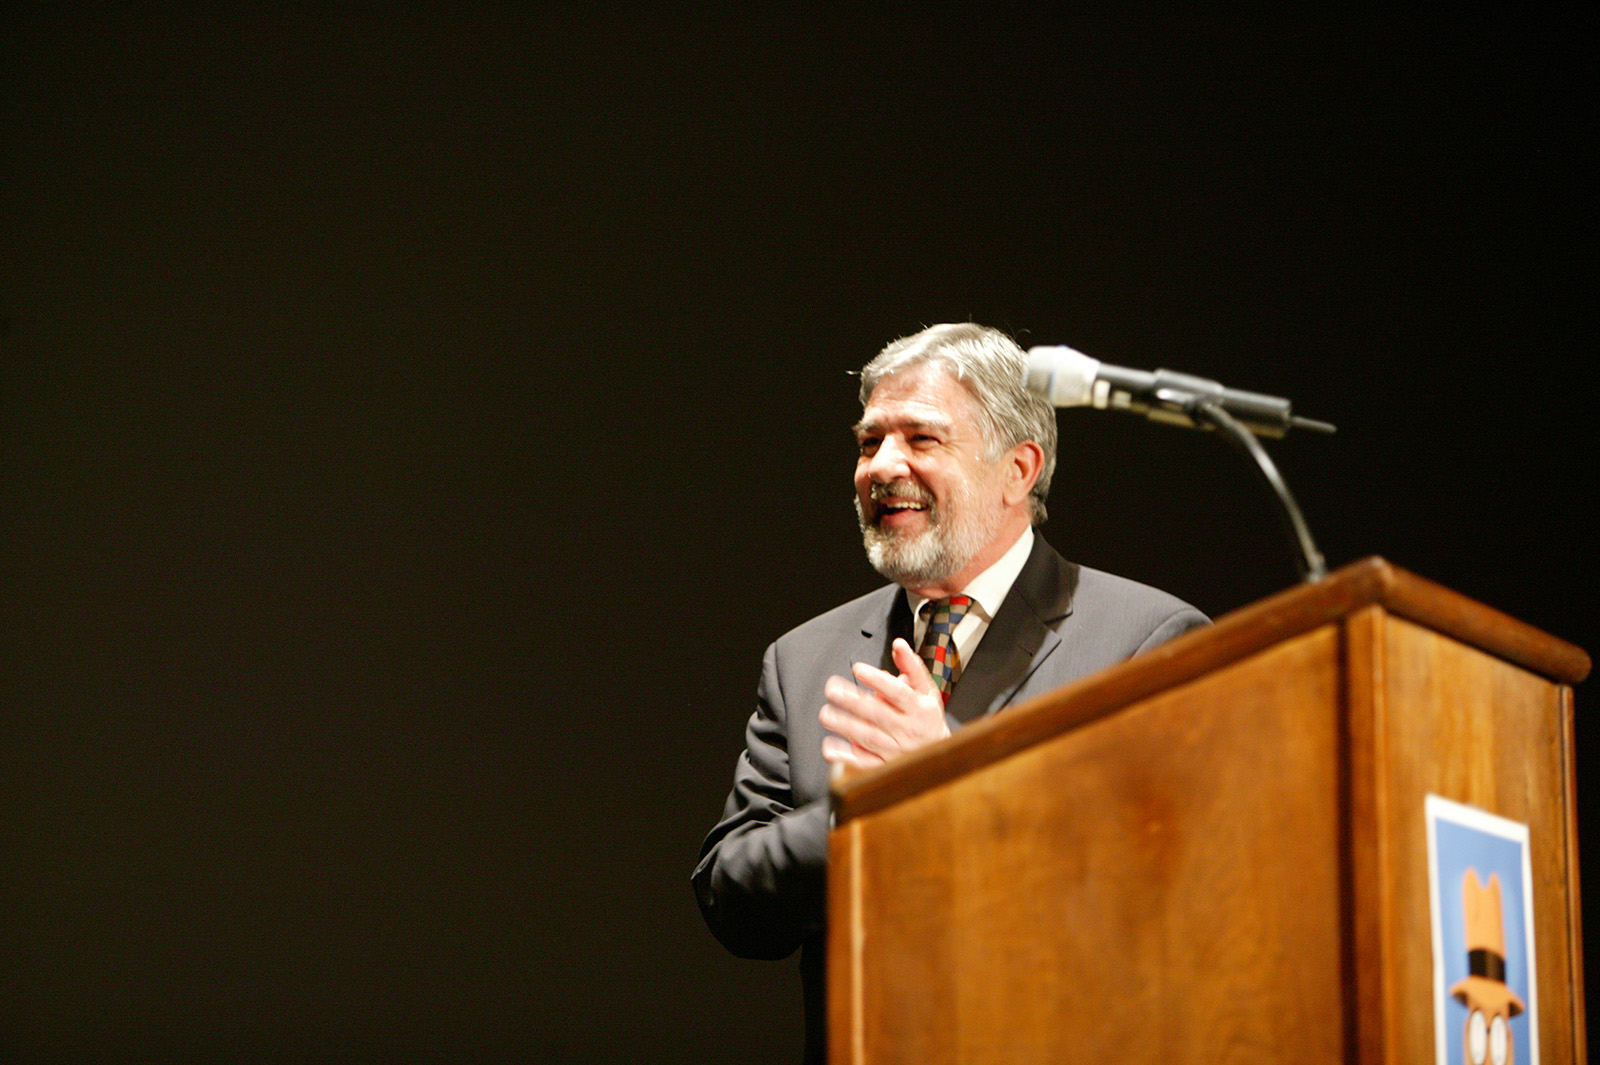 Festival founder, Darryl Macdonald, introducing the opening night film, Valentine, from the stage of the Paramount Theatre